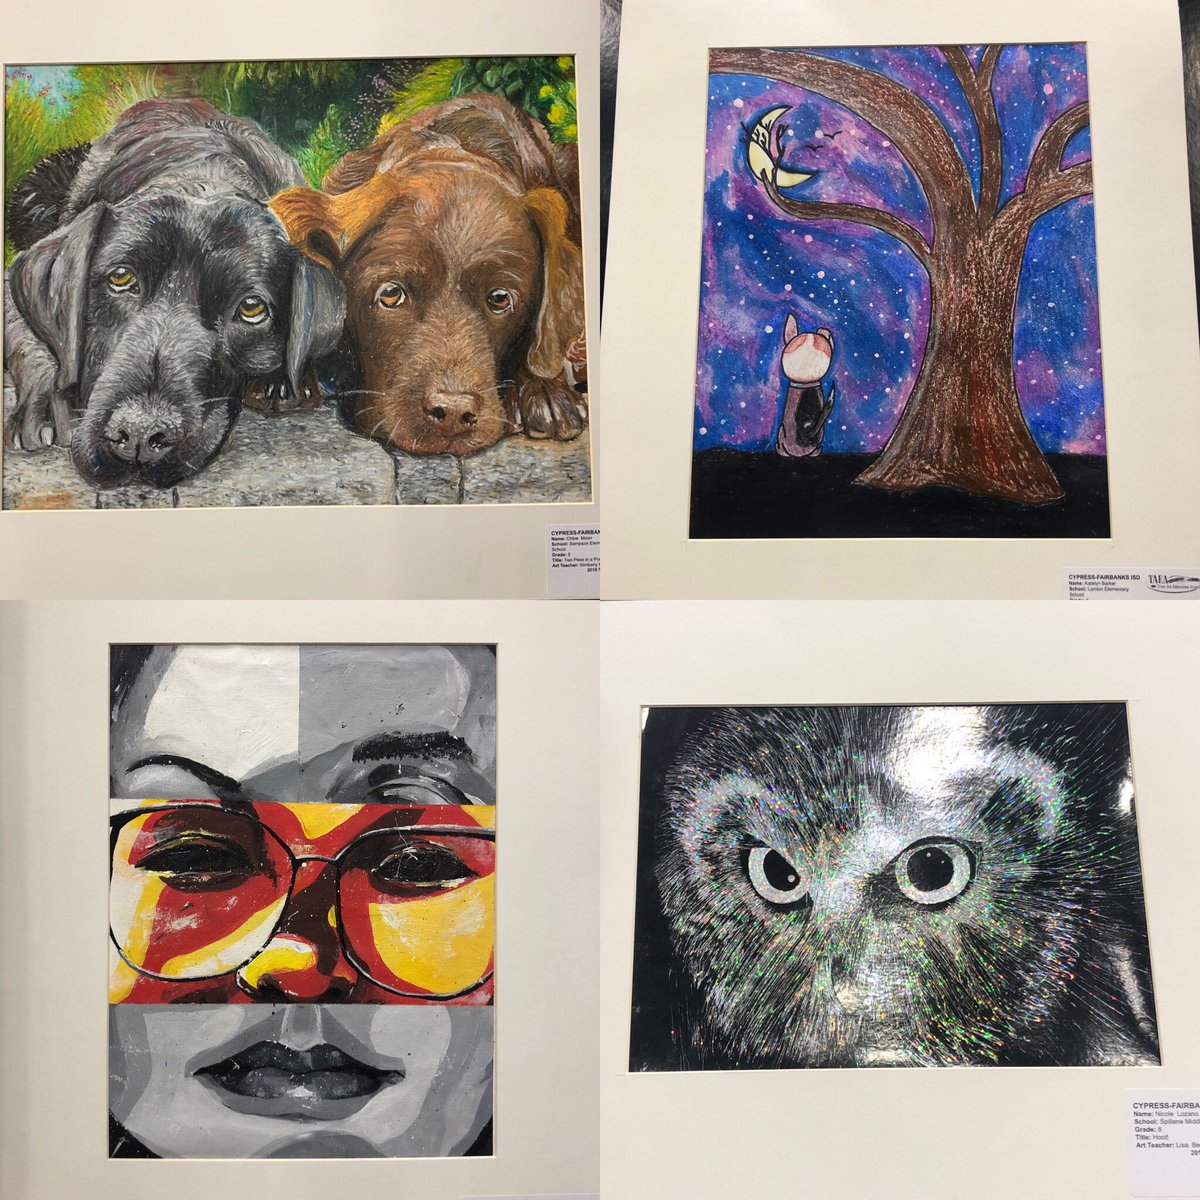 I am so proud to be a part of @CFISDArt! Beautiful artwork created by such talented and creative @CyFairISD students. @TexasYam @tasatasb #texasYAM20 @Youthartmonth @TXarted